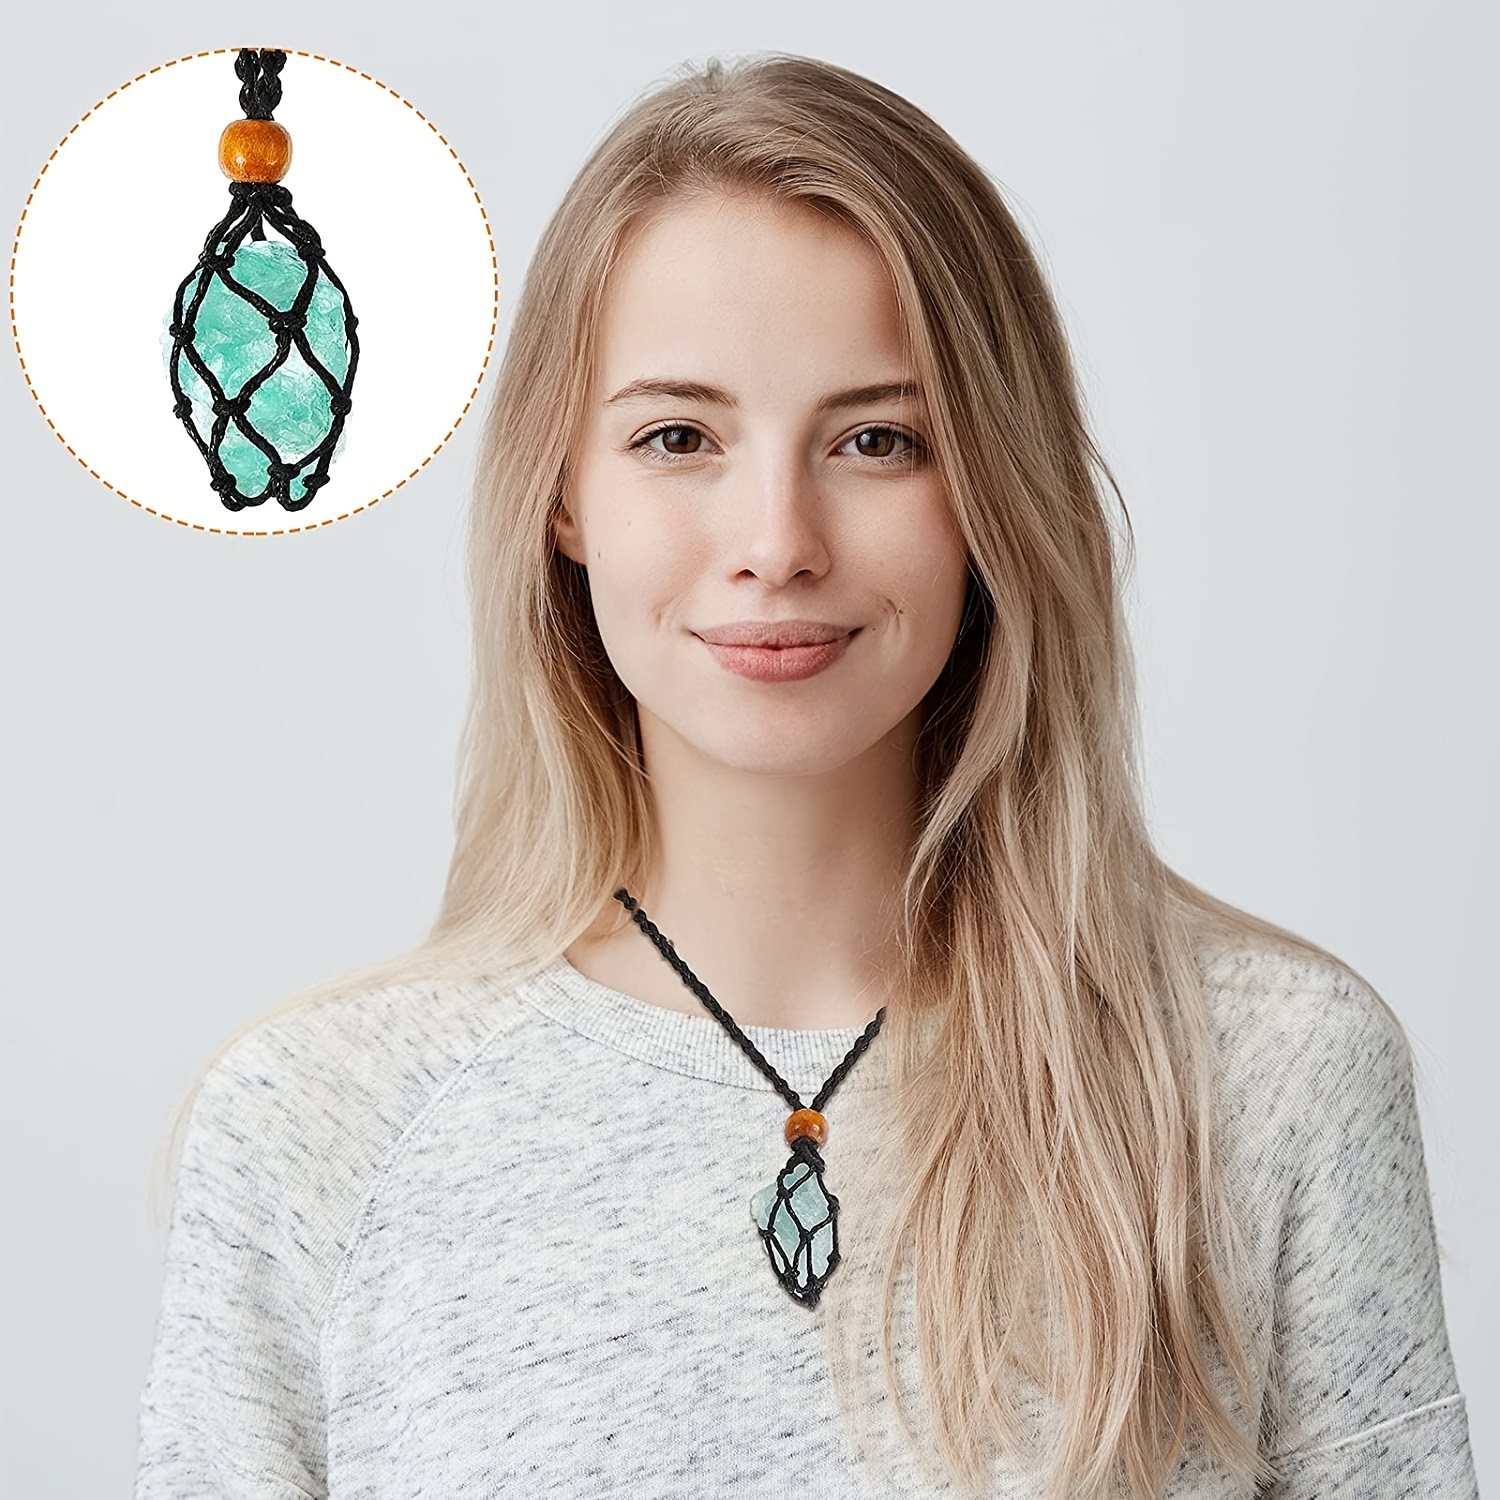 Natural Agate Net Pendant With Healing Crystal Necklace And Stone Holder  For Jewelry Making Hand Woven Cord Rope With Creative Personality From  Cardhxj, $10.15